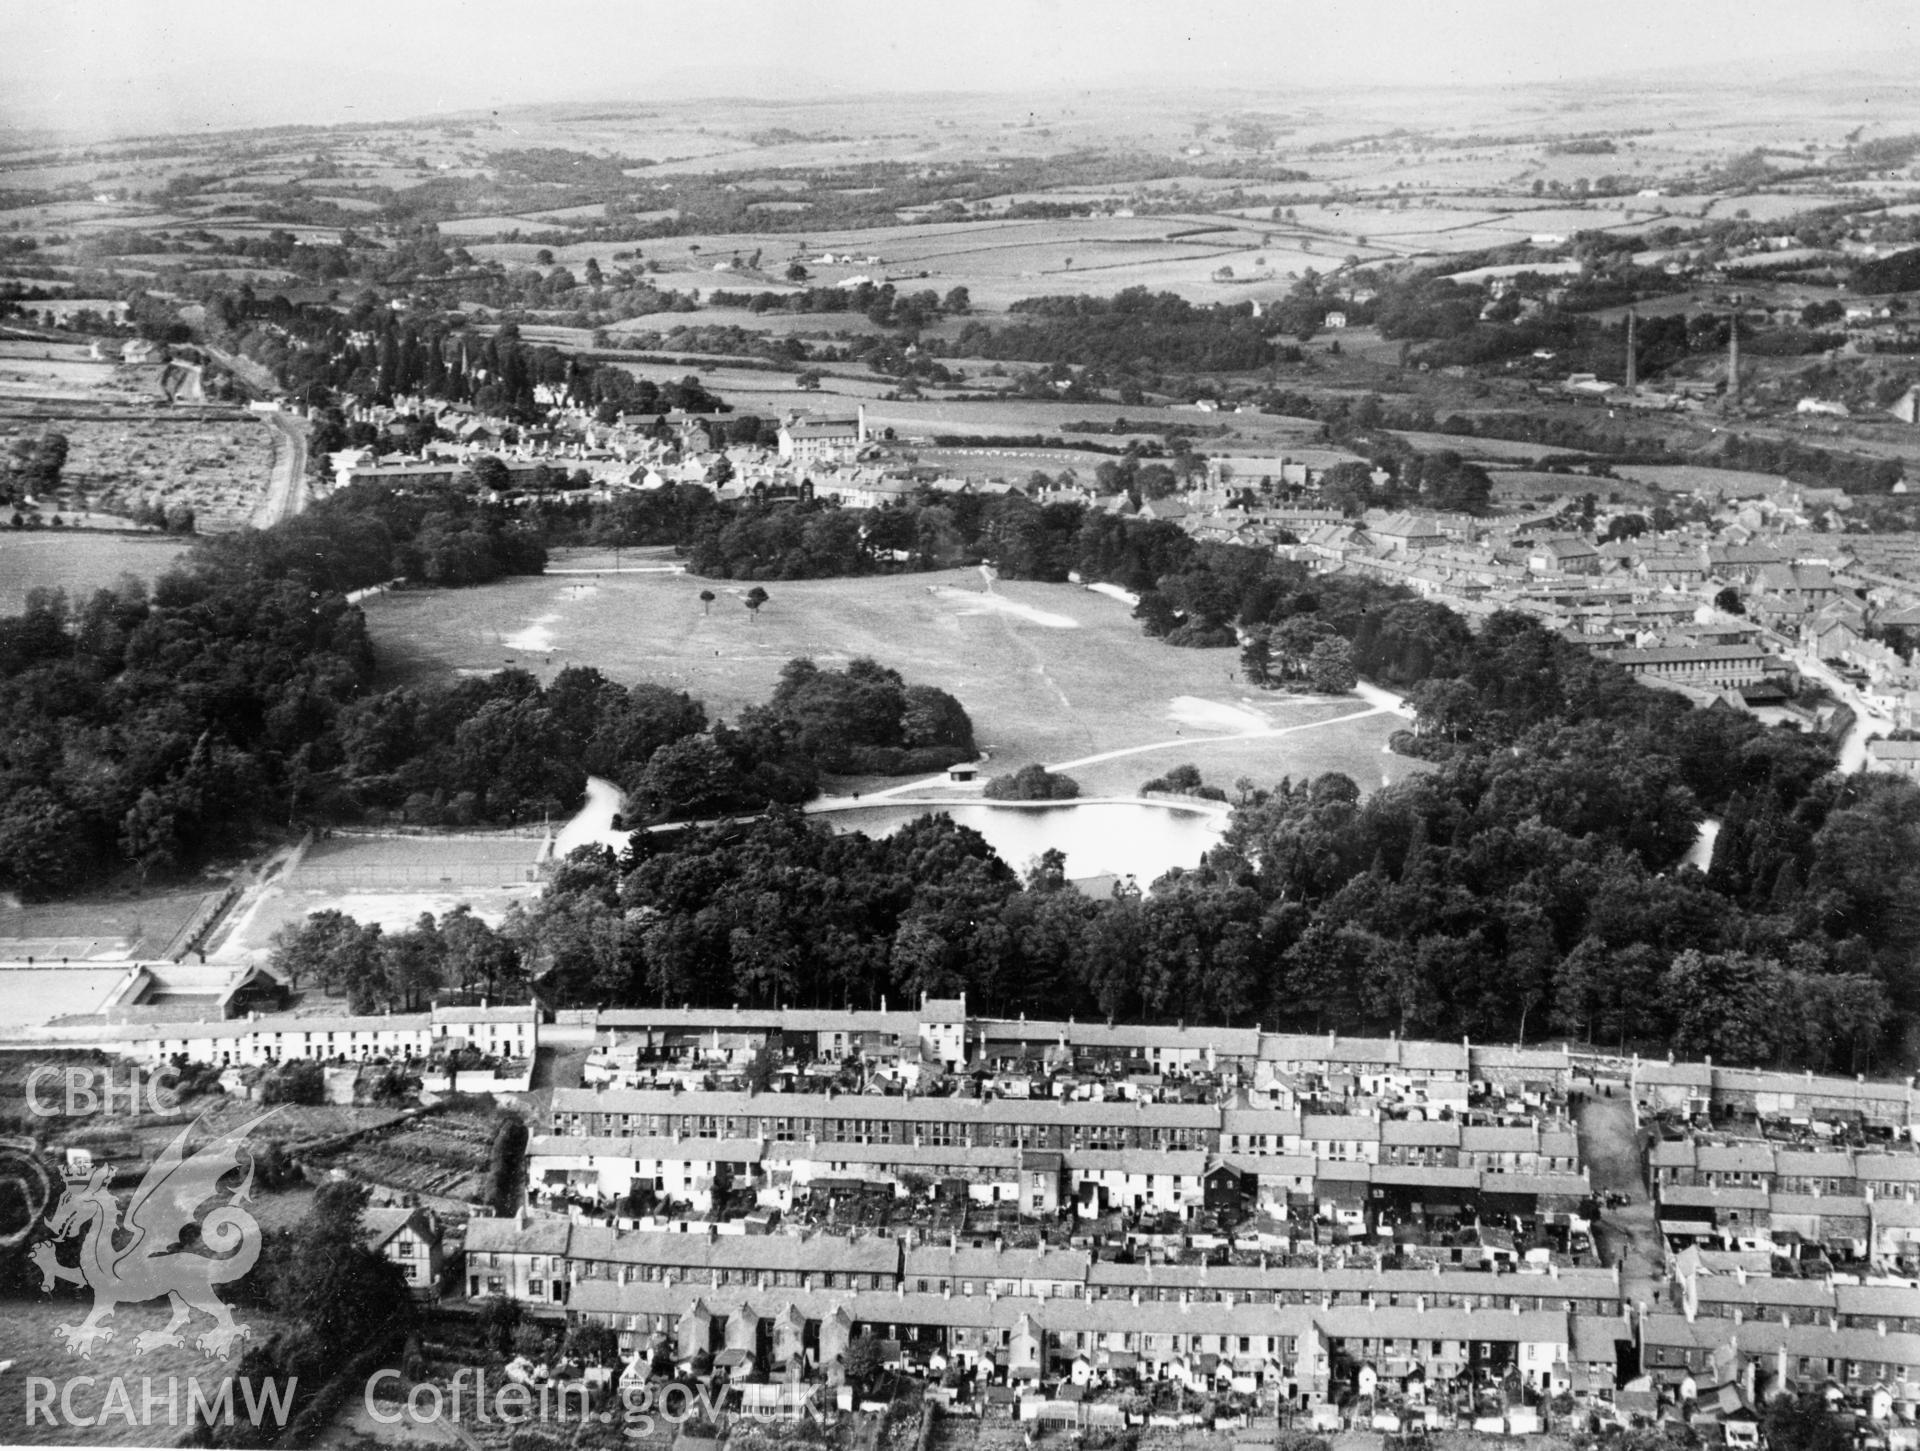 View of Aberdare with Aberdare Park and Trecyncon in the background. Oblique aerial photograph, 5?x4? BW glass plate.